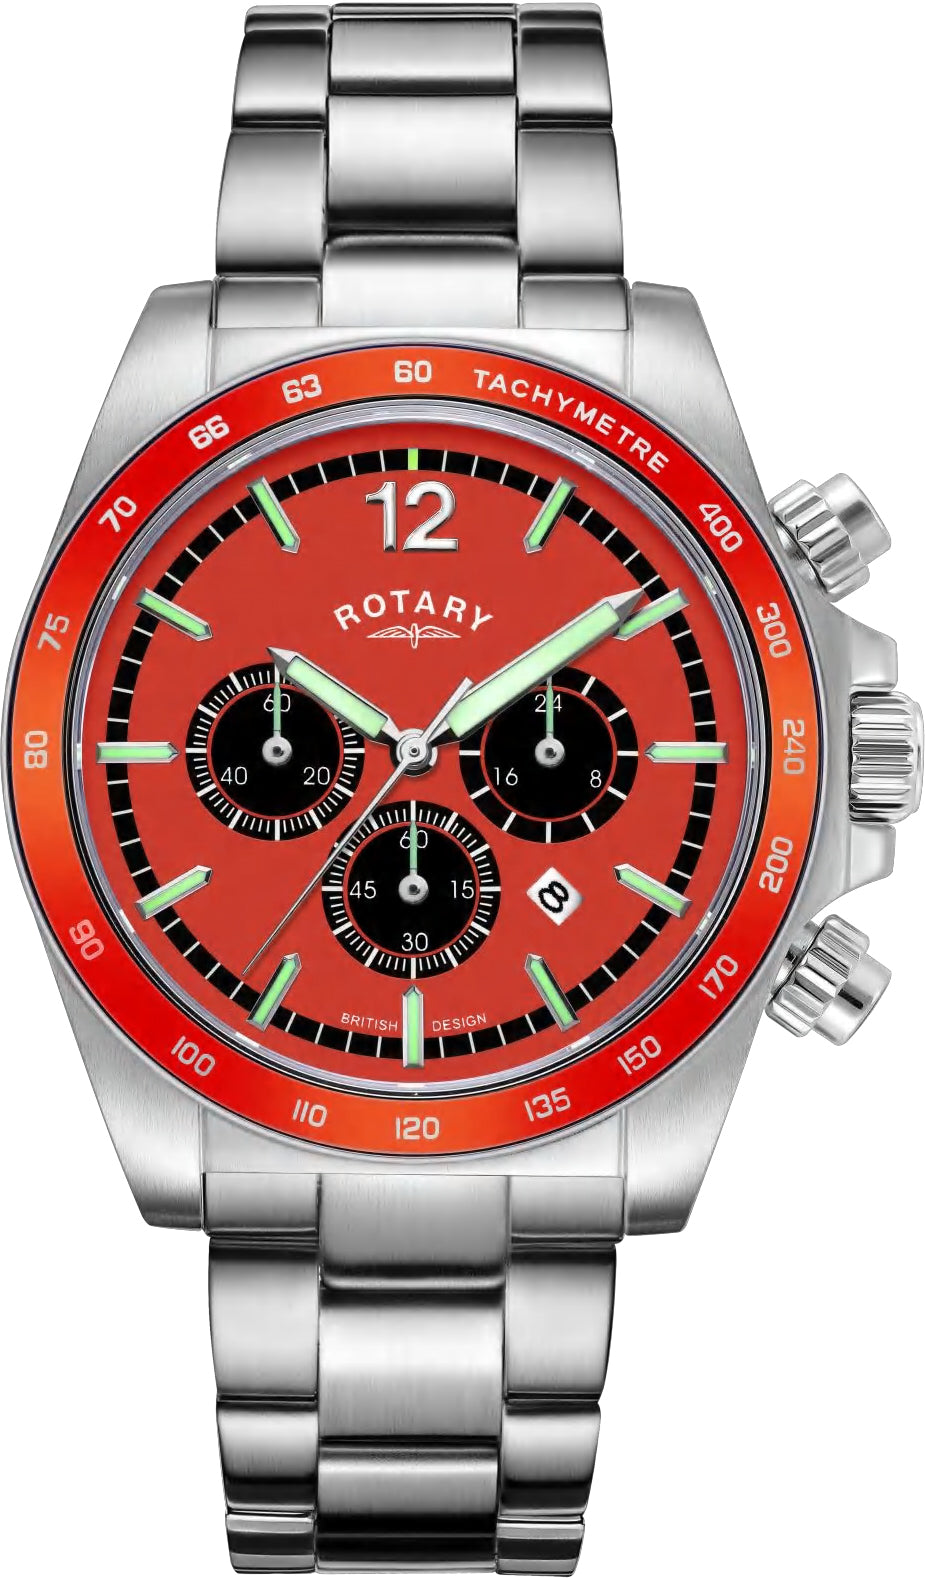 Rotary Watch Henley Chronograph Mens